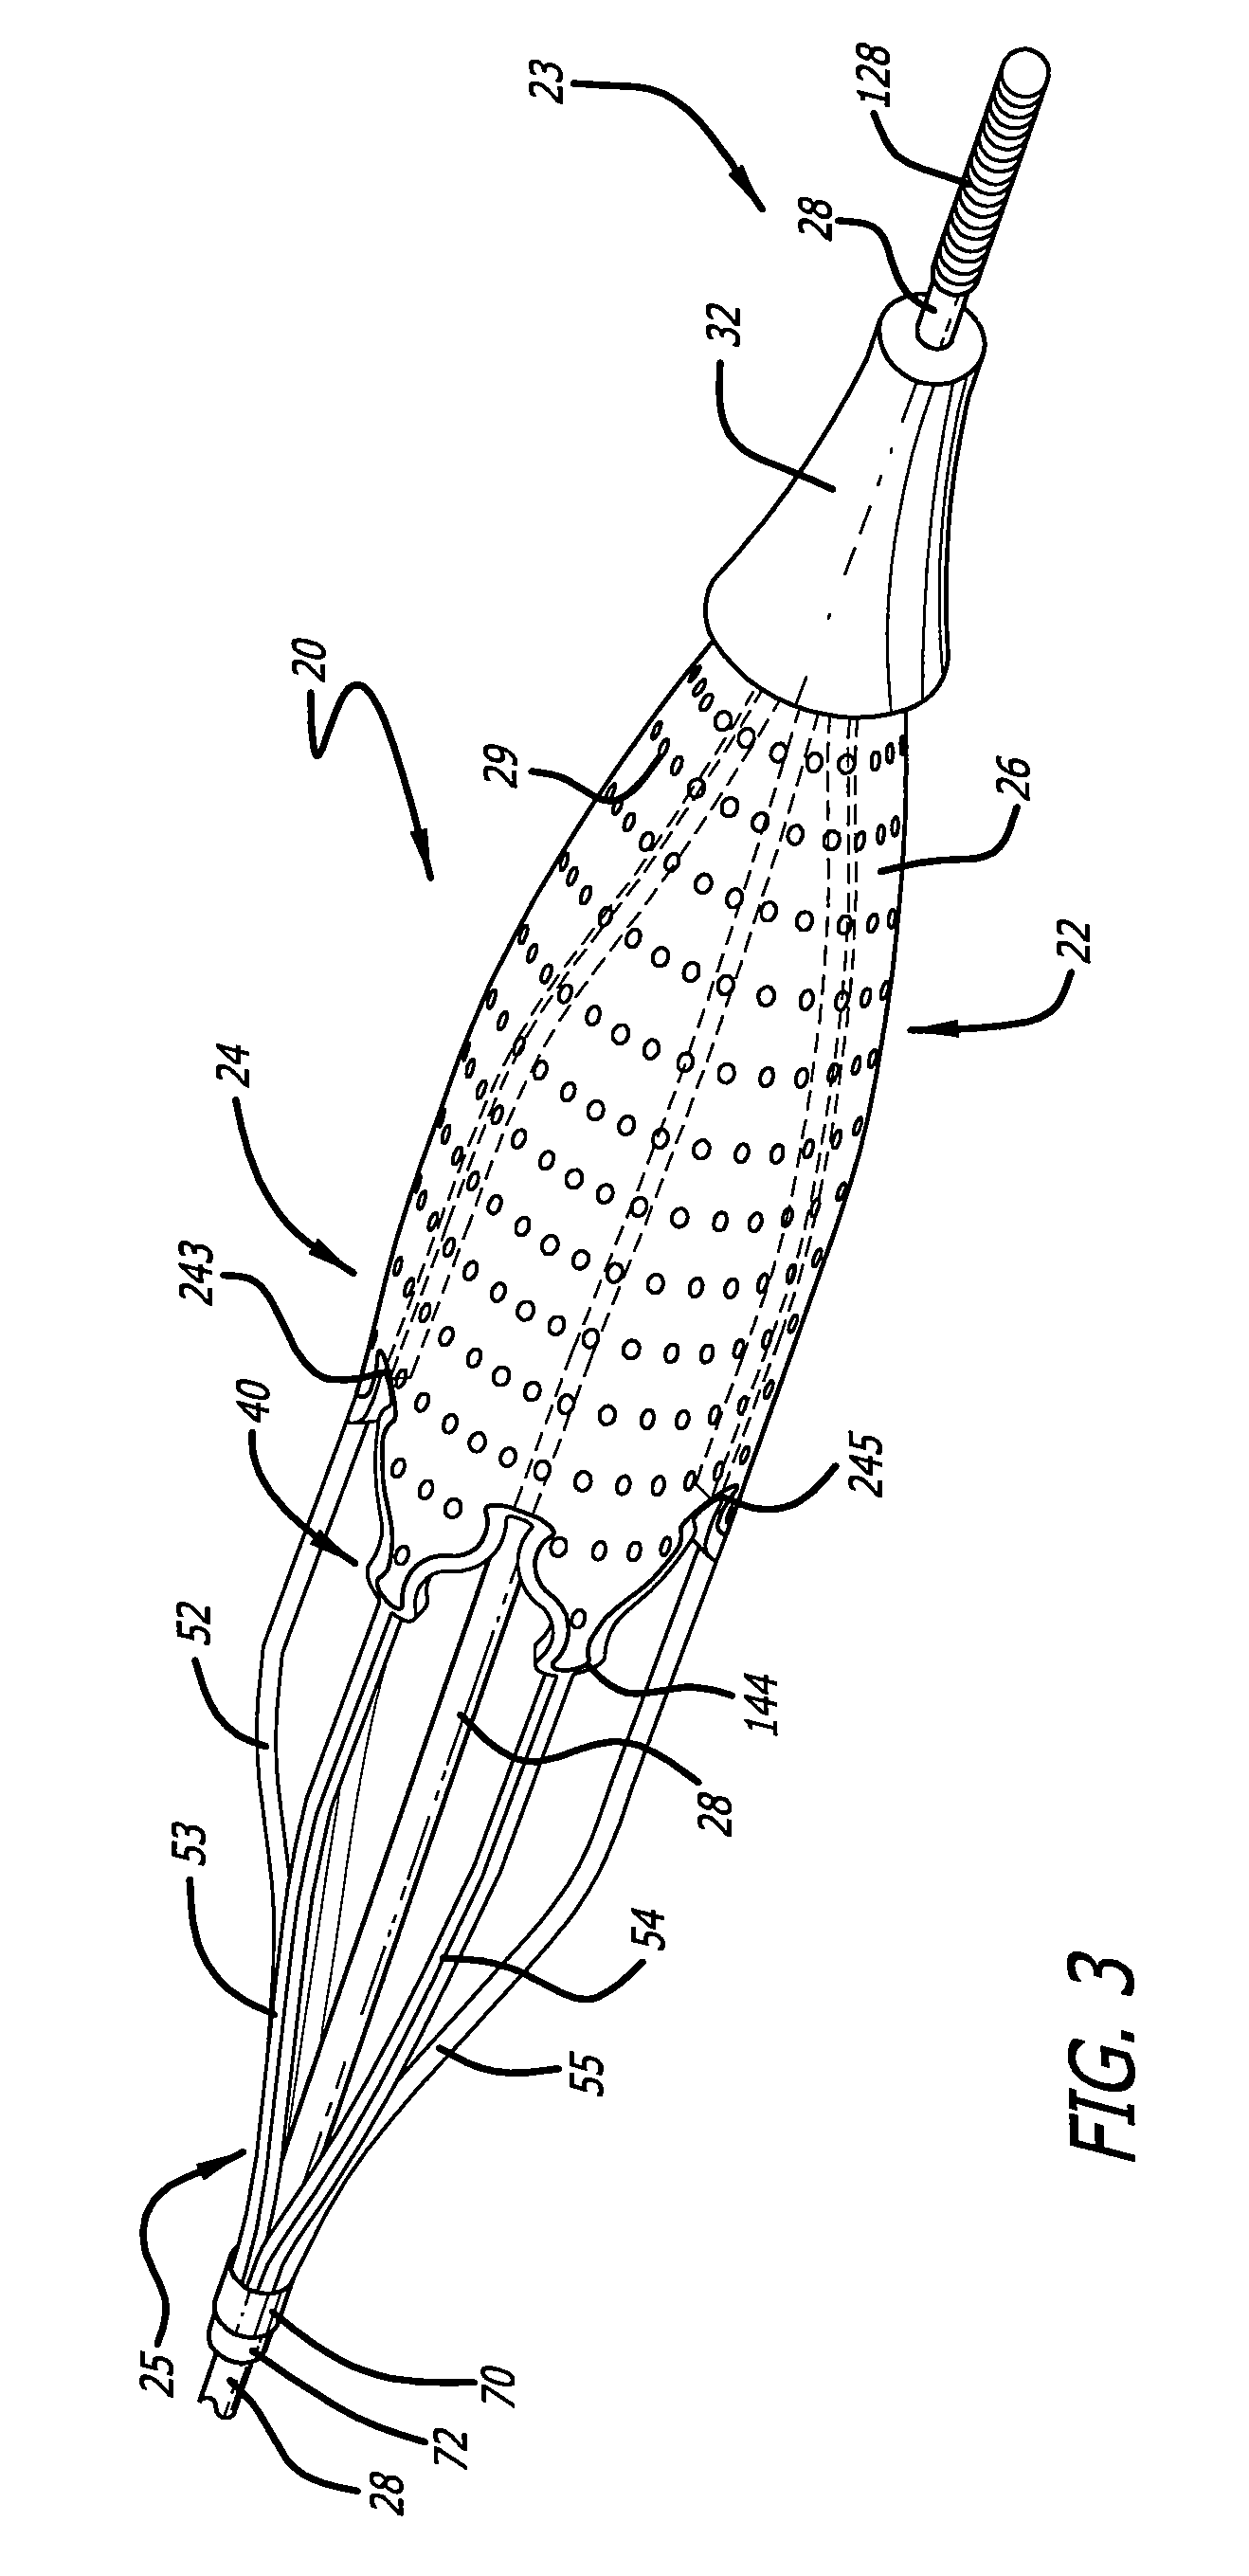 Embolic protection device with open cell design